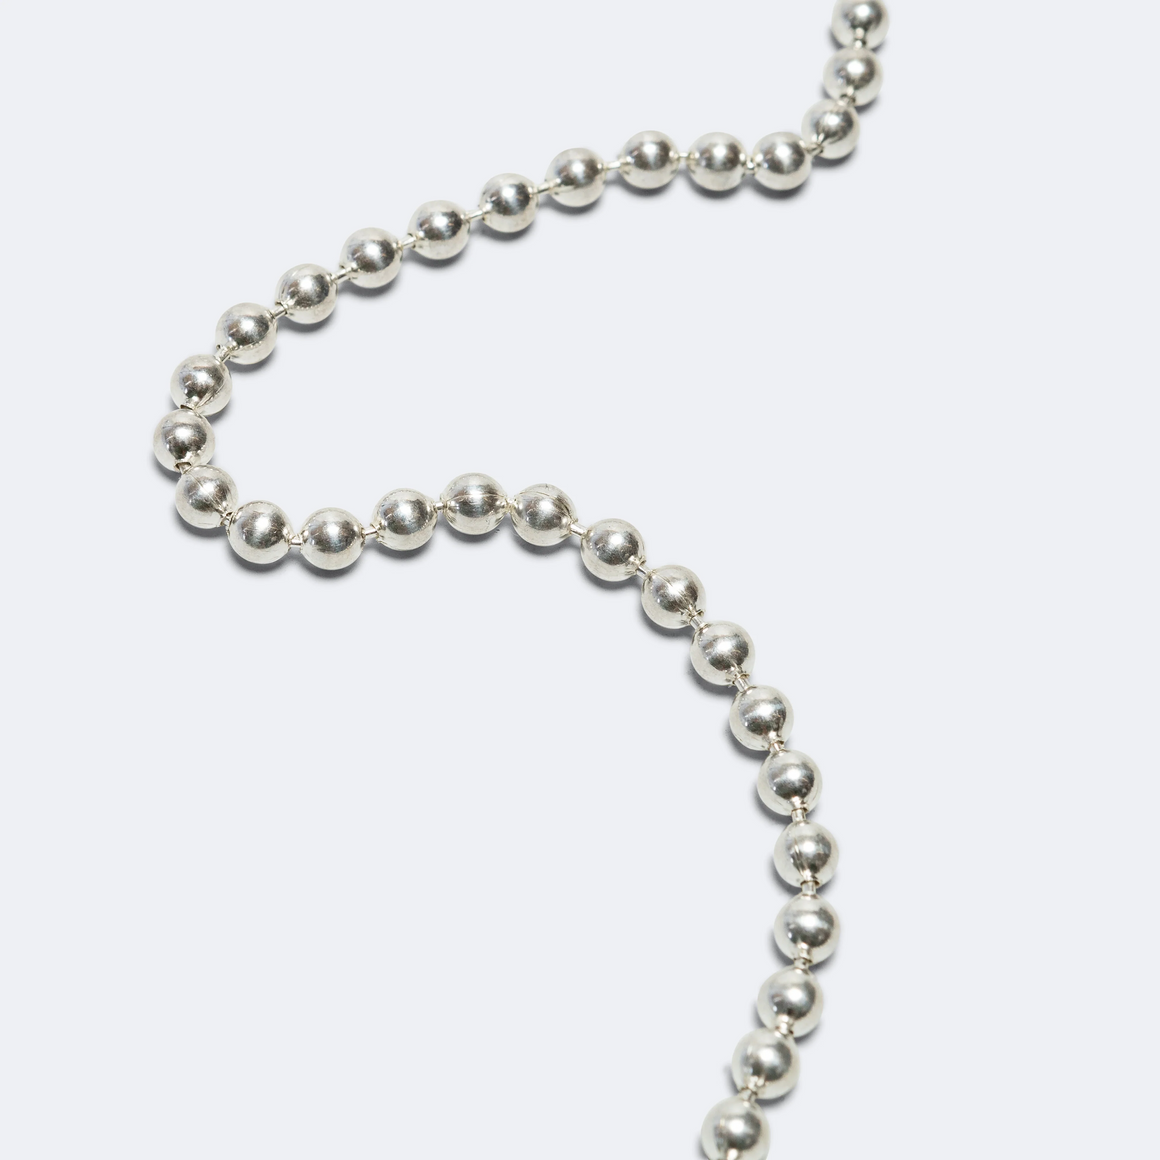 Good Art Hlywd - Ball Chain Necklace Goosebumps - A - 925 Silver - UP THERE